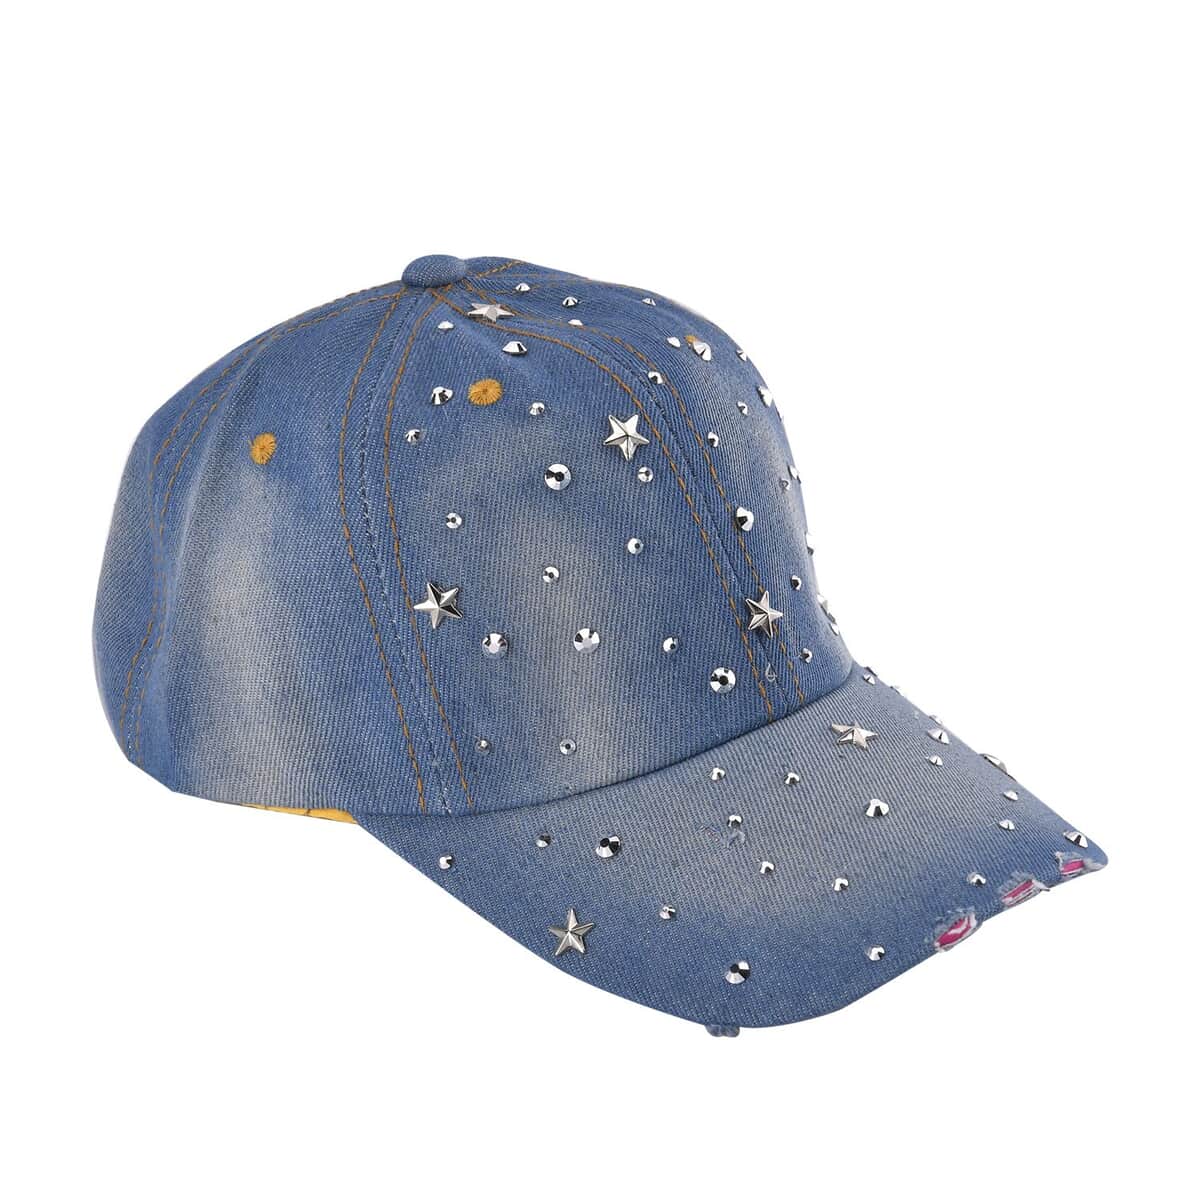 Shining Crystal and Unique Design Cap with Velcro Fasteners (Adjustable Strap) - Blue image number 1